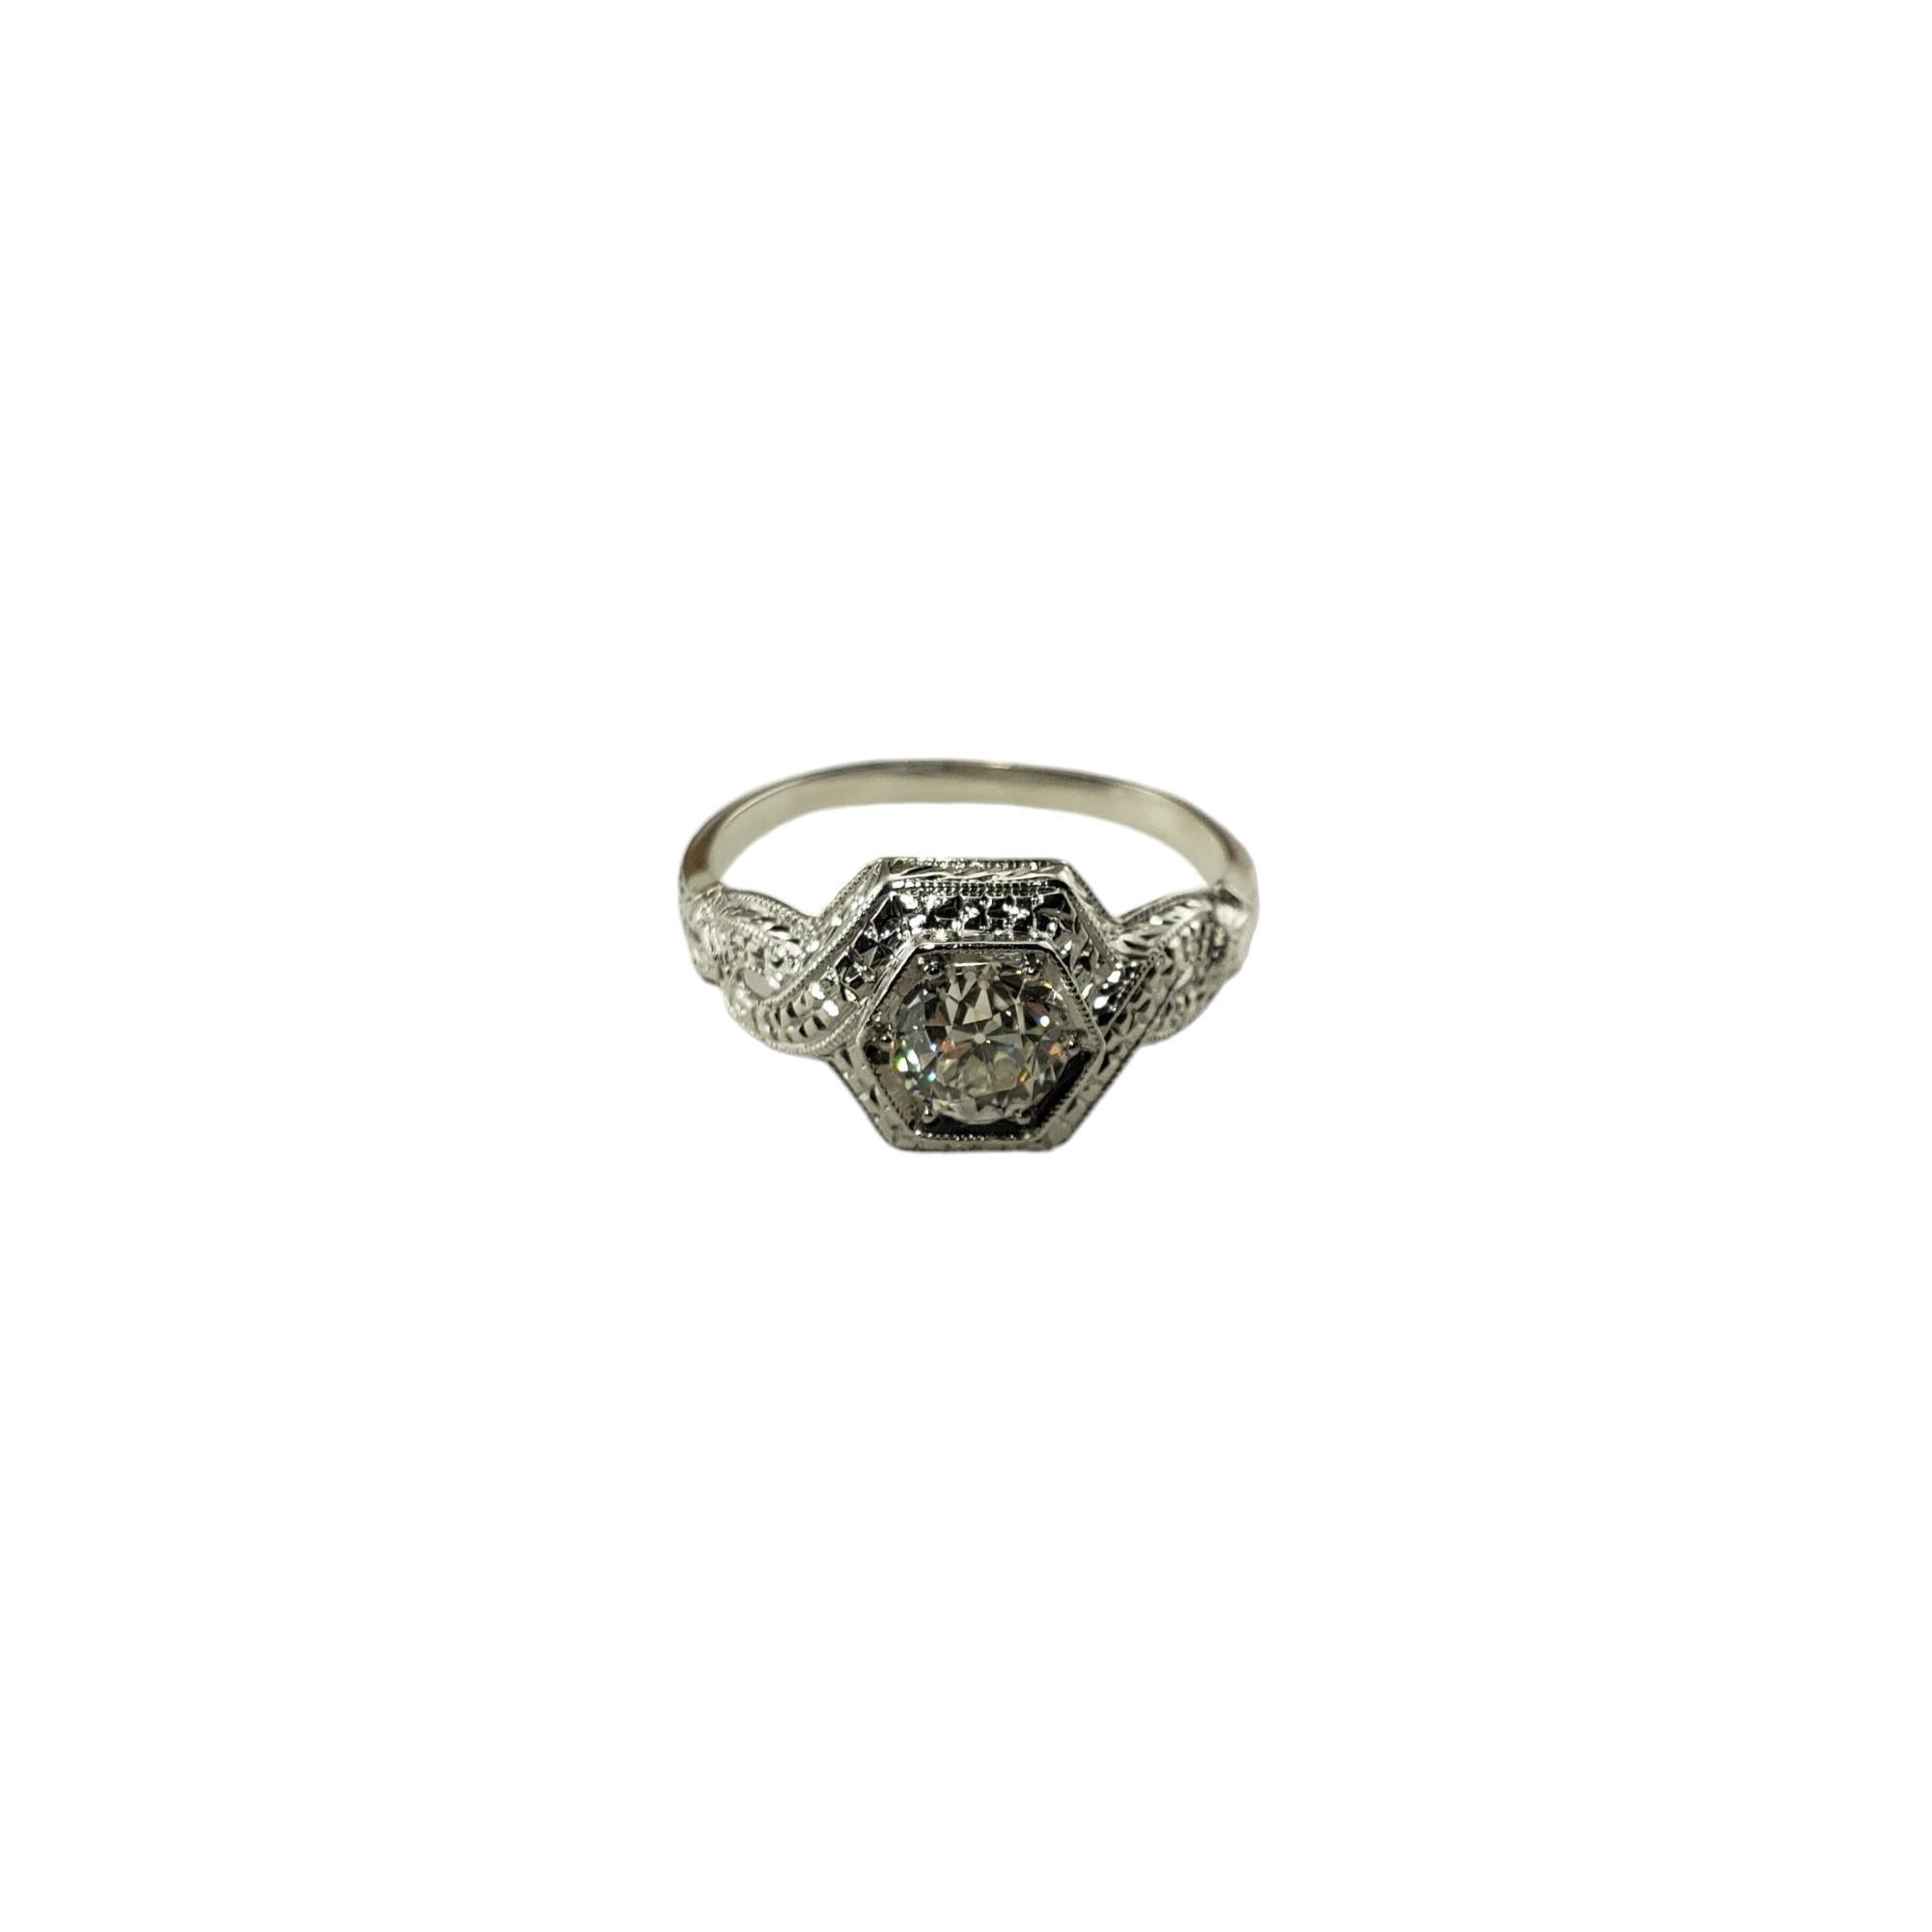 Vintage Platinum Diamond Ring Size 7 JAGi Certified-

This sparkling ring features one Old European cut diamond set in beautifully detailed platinum.  Width: 10 mm.  Shank: 1.7 mm.

Diamond weight: .69 ct.

Diamond color: G

Diamond clarity: